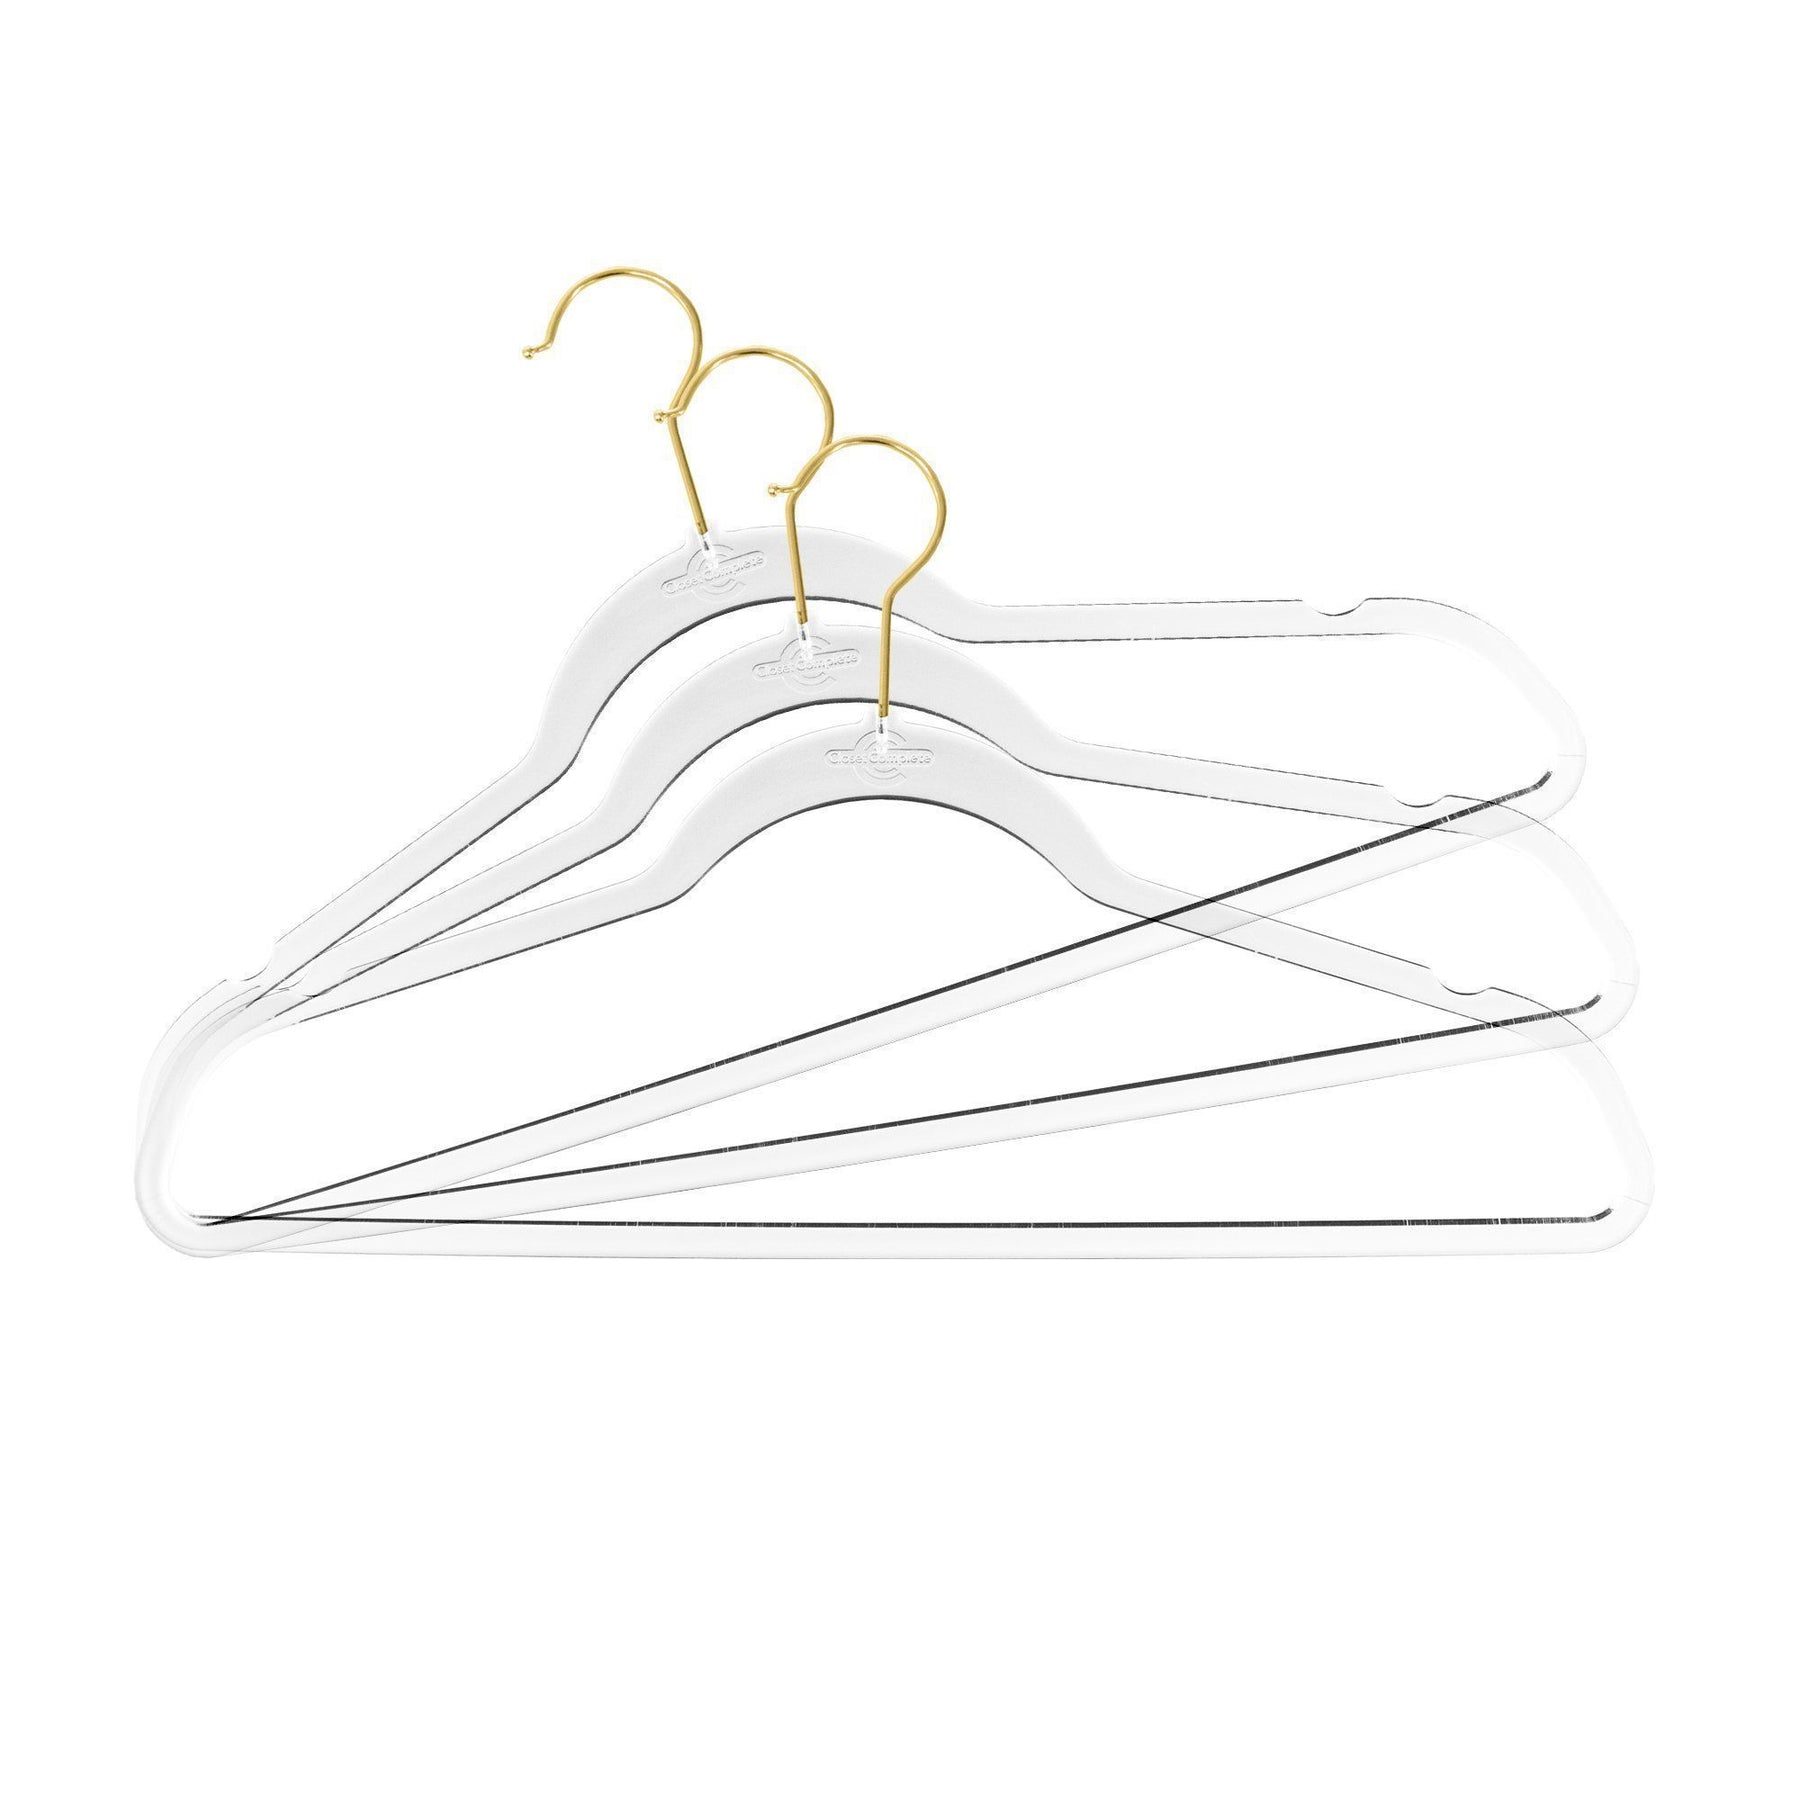 https://cdn.shopify.com/s/files/1/2993/5404/products/closet-complete-acrylic-hangers-completely-clear-invisible-acrylic-hangers-69185-7162348765269_1800x1800.jpg?v=1552518837